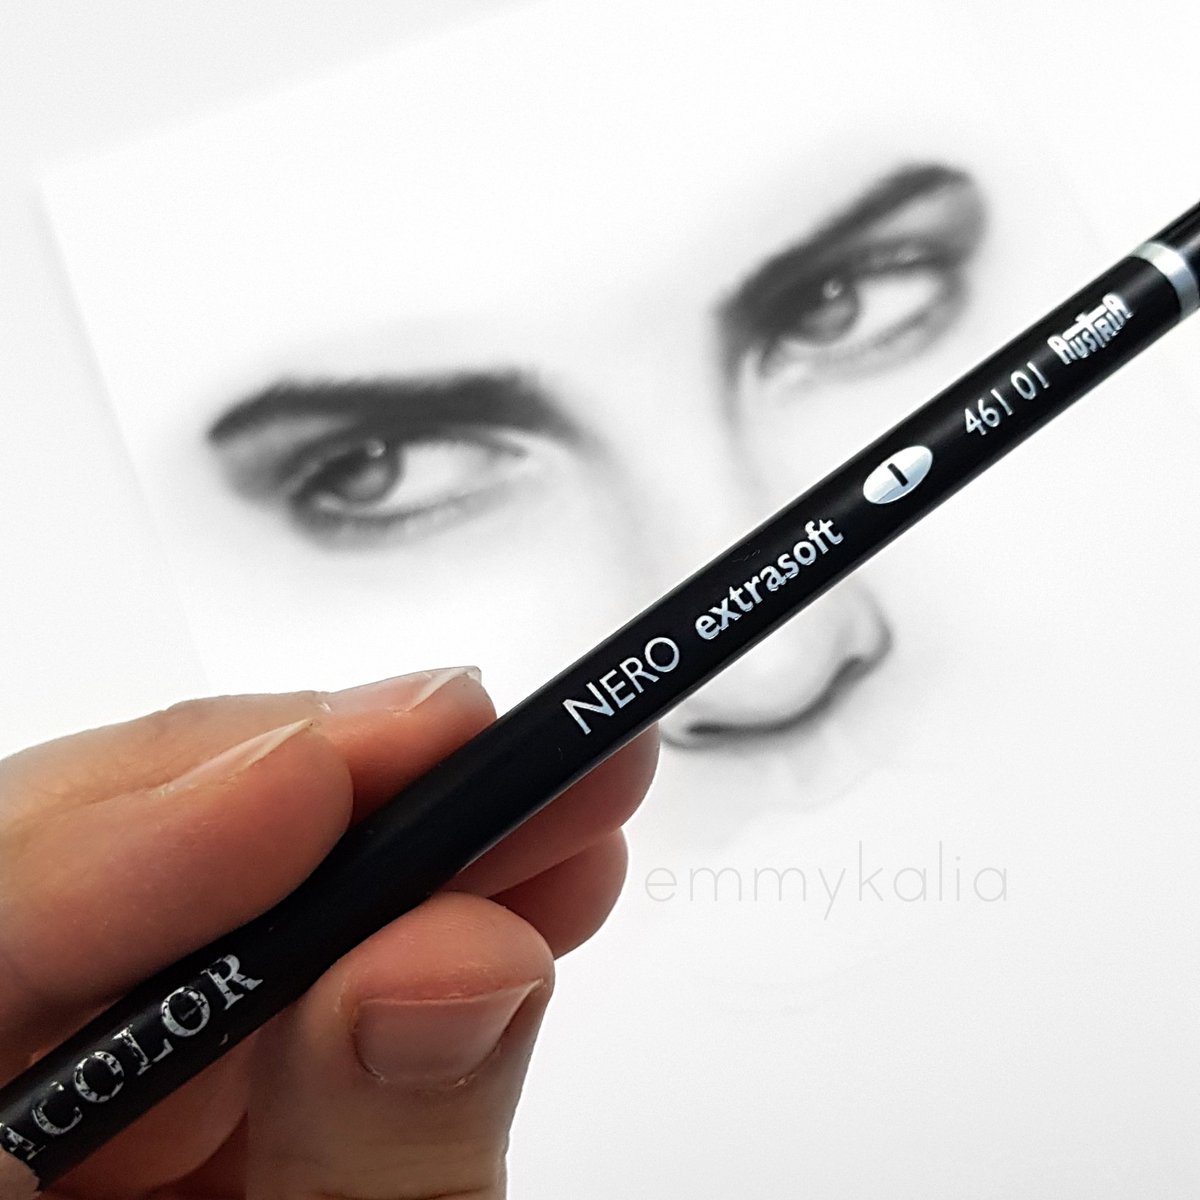 Cretacolor Nero Oil Based Charcoal Pencils In Extra Soft.